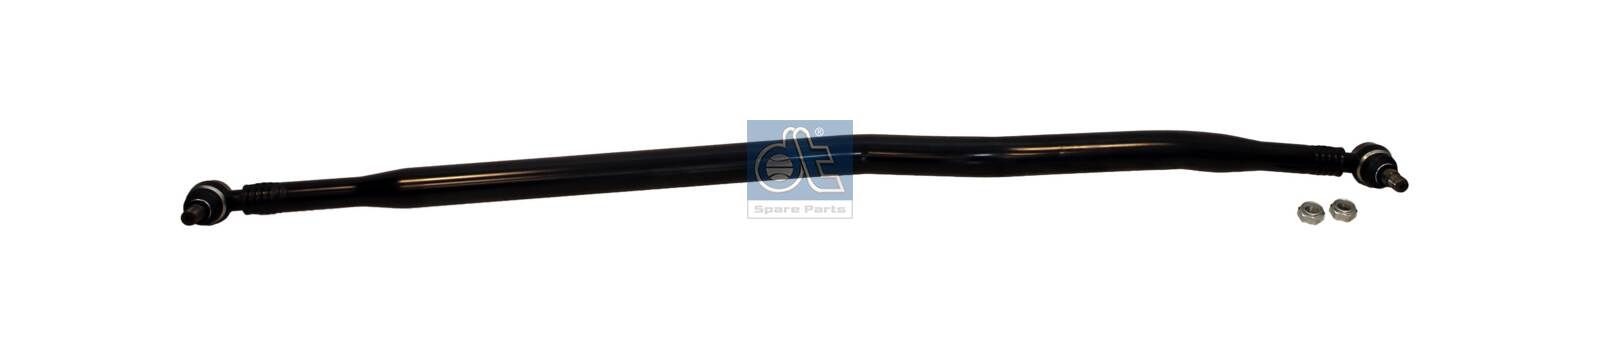 DT Spare Parts 3.63194 Rod Assembly 82466106195